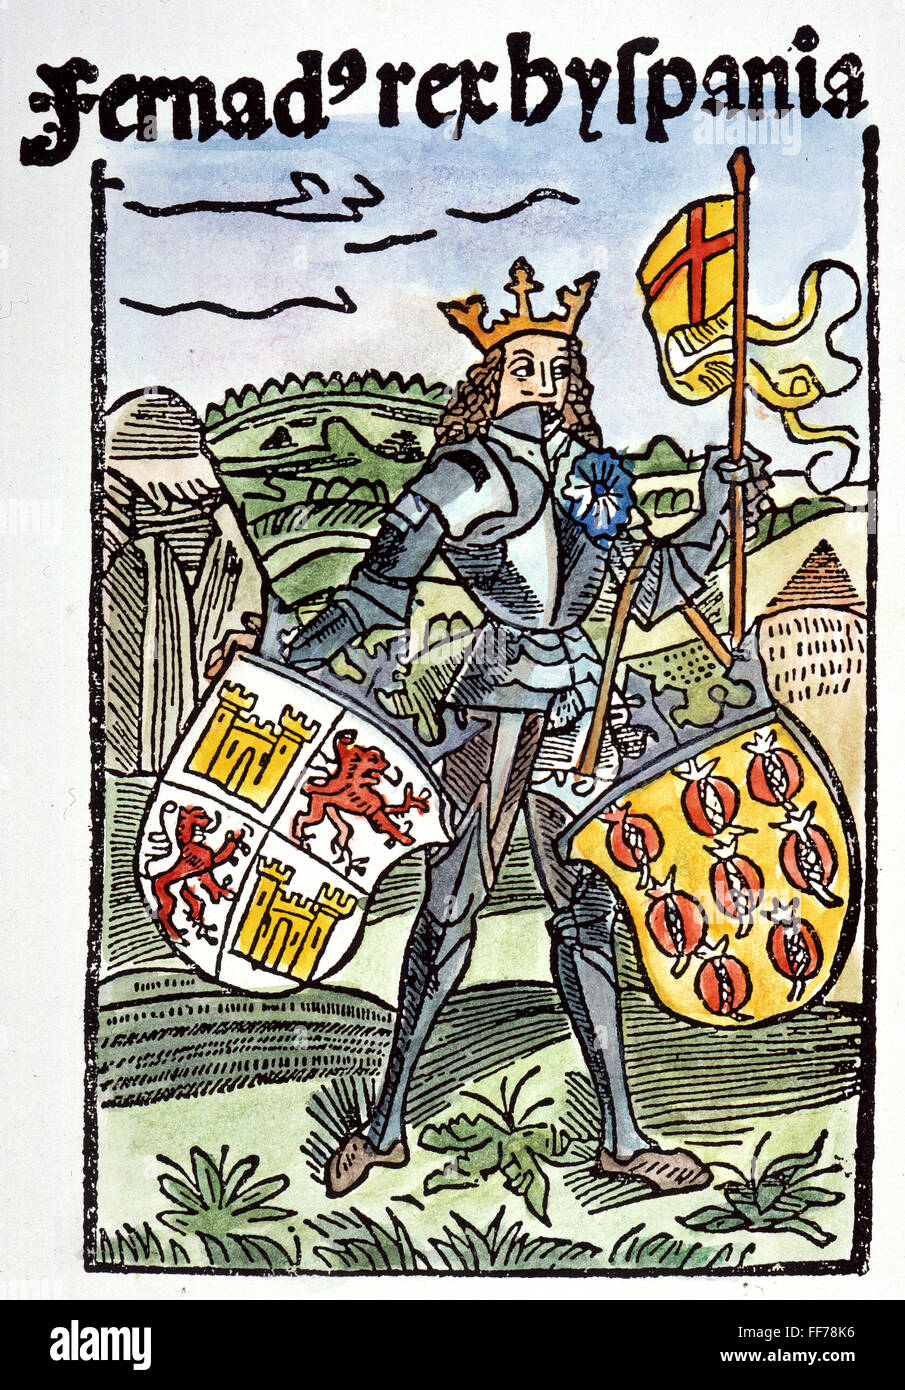 KING FERDINAND V OF CASTILE /n(1452-1516) after his 1492 conquest of Granada, whose shield he bears on his left arm: woodcut from the illustrated edition of the Columbus letter to Sanchez, 1493. Stock Photo